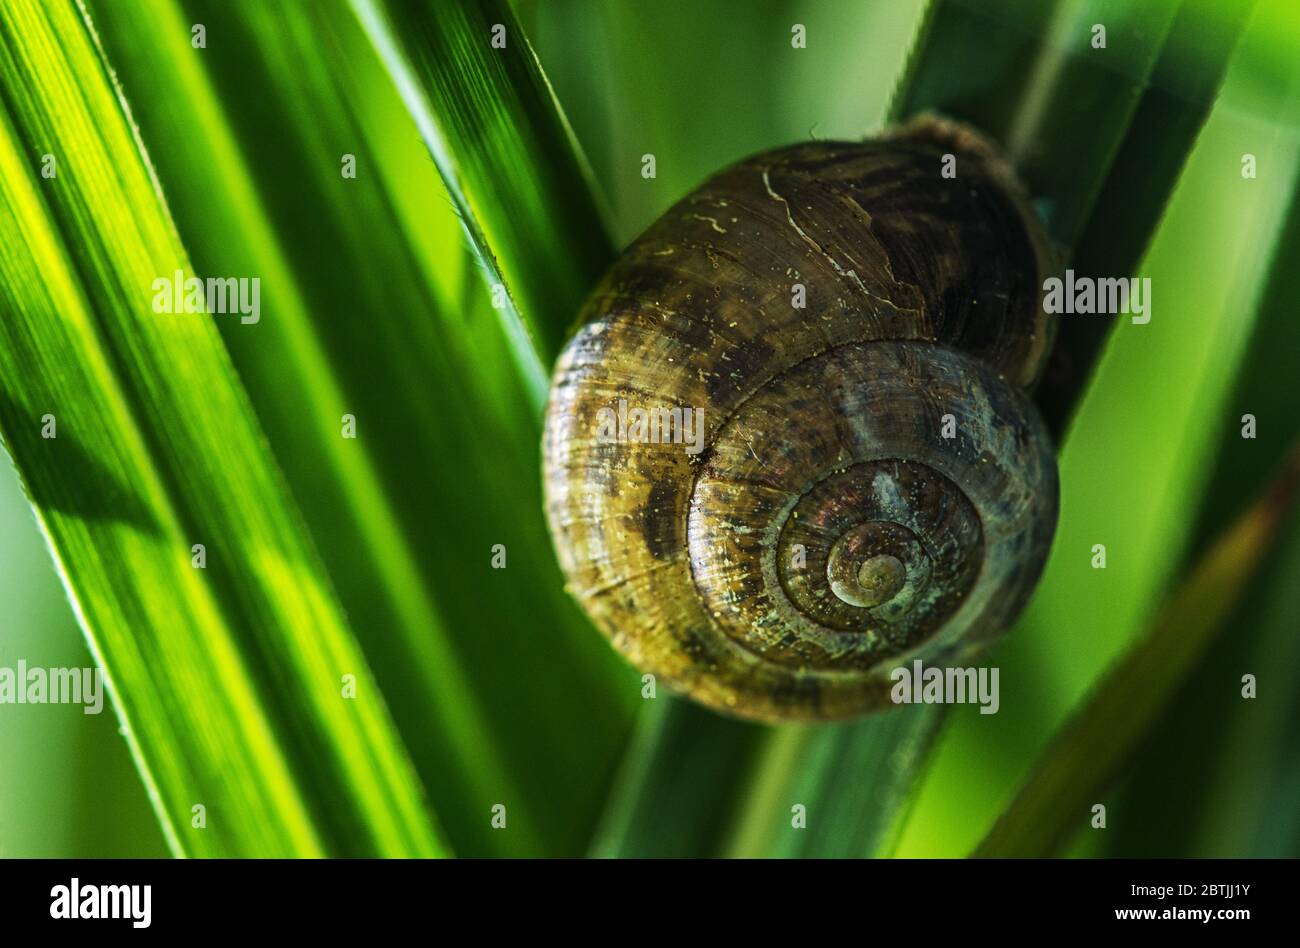 Garden Snail on One of the Blade of Grass. Terrestrial Pulmonate Gastropod Mollusc in the Family Helicidae. Macro Close Up. Stock Photo